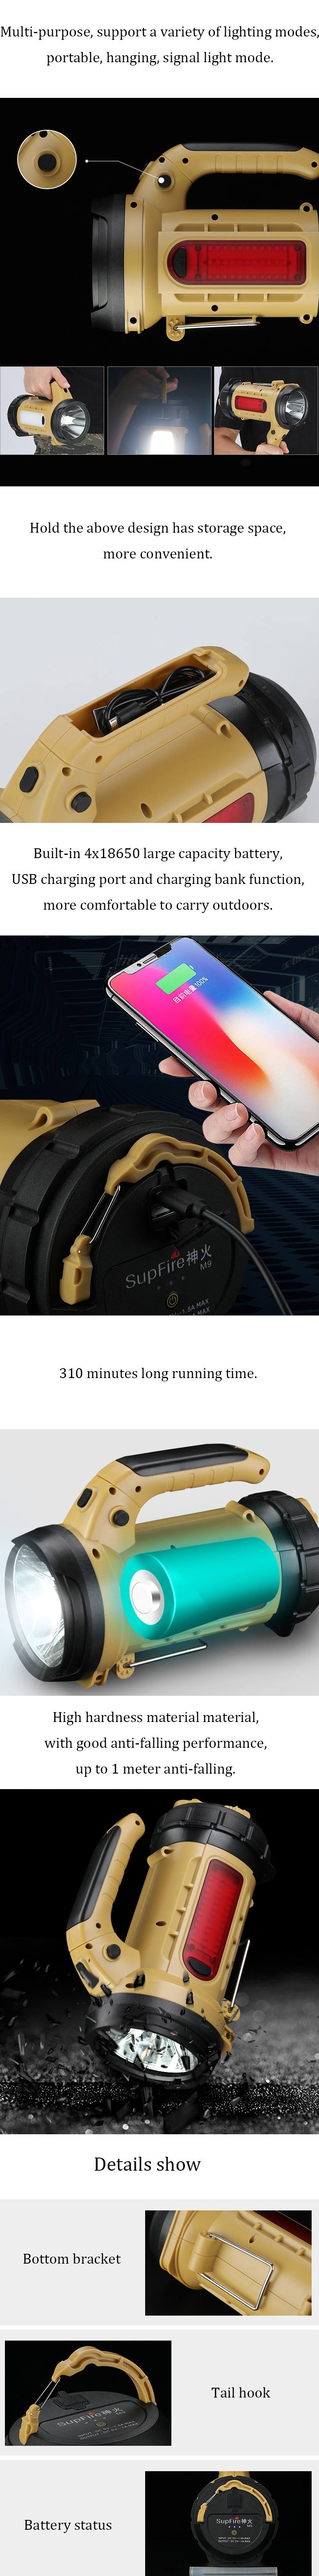 SupFire-M9-Portable-Fall-proof-Waterproof-SST40-410m-950Lumens-3Modes-USB-Rechargeable-Multifunction-1572282